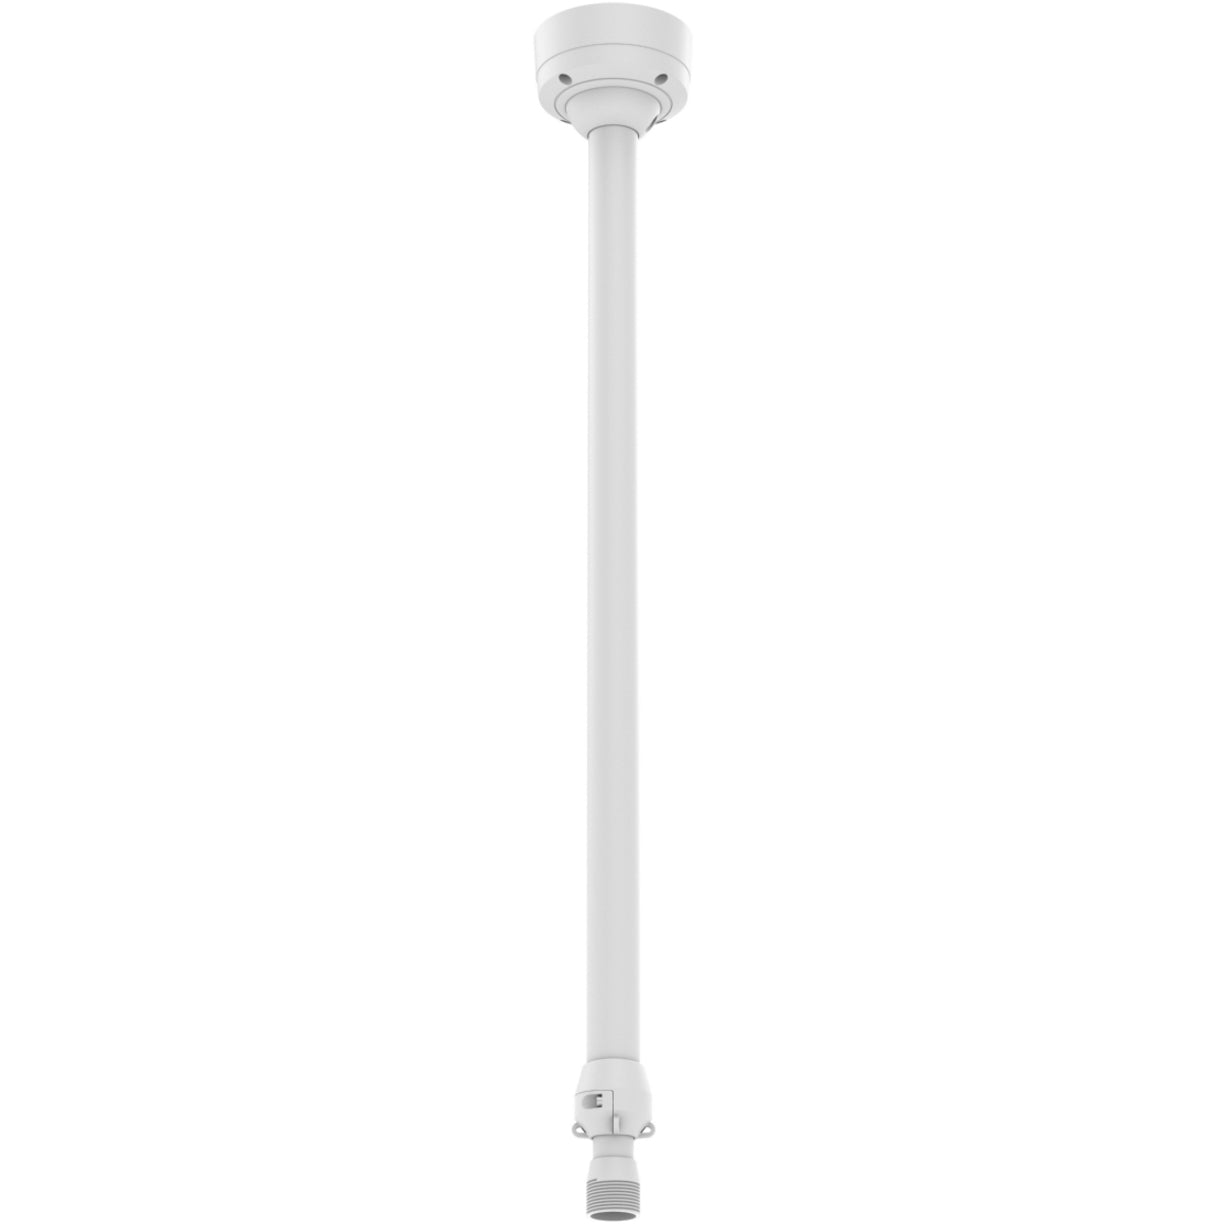 AXIS 5507-451 T91B50 Telescopic Ceiling Mount, Adjustable Length, Cable Management, Vandal Resistant, Corrosion Resistant, Swivel